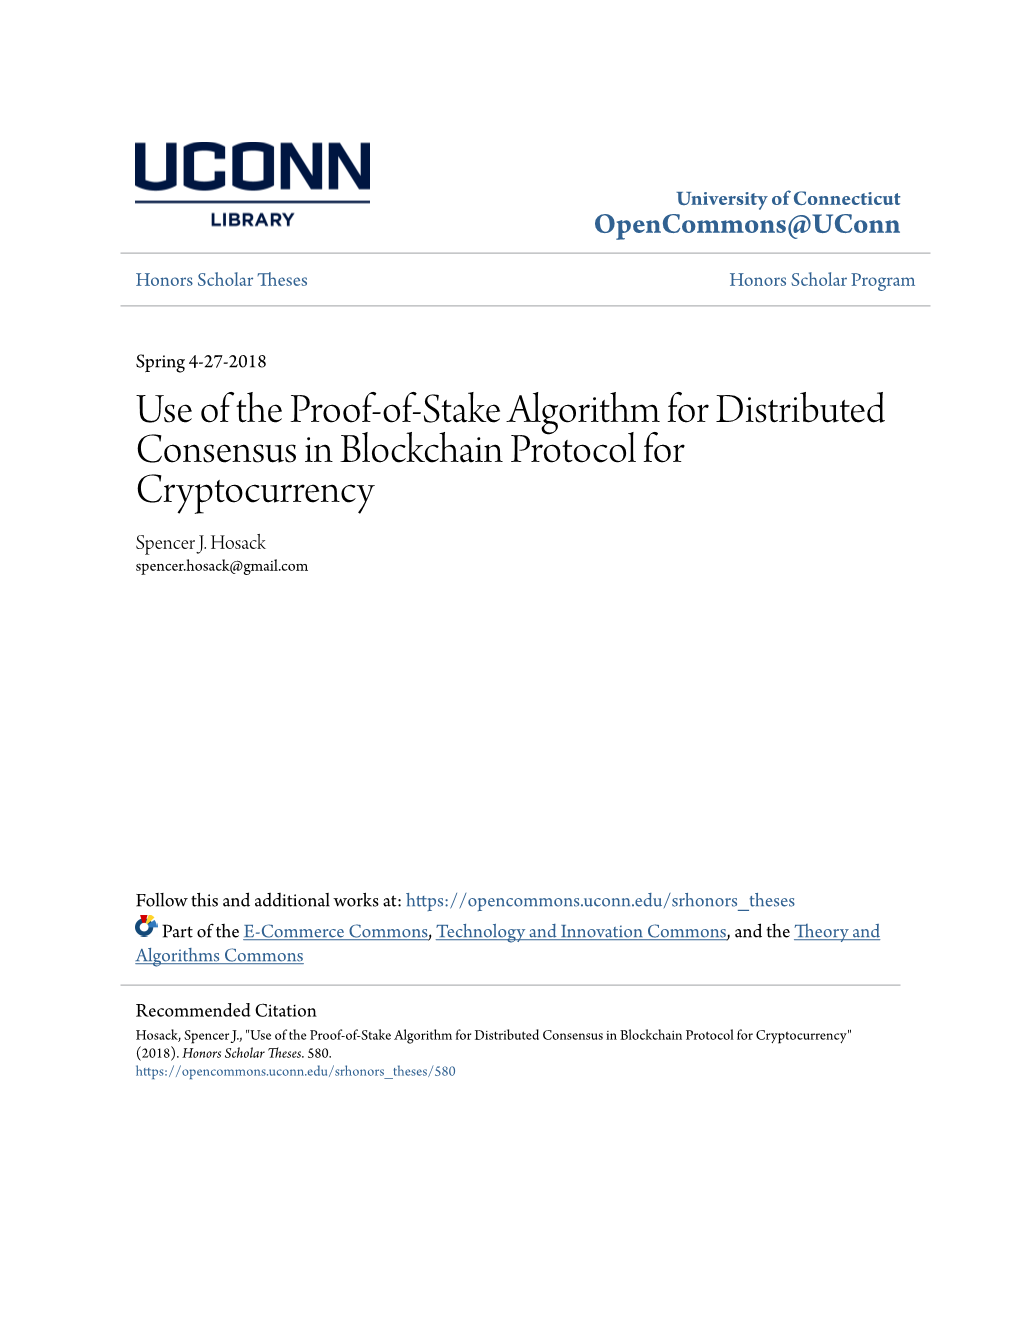 Use of the Proof-Of-Stake Algorithm for Distributed Consensus in Blockchain Protocol for Cryptocurrency Spencer J